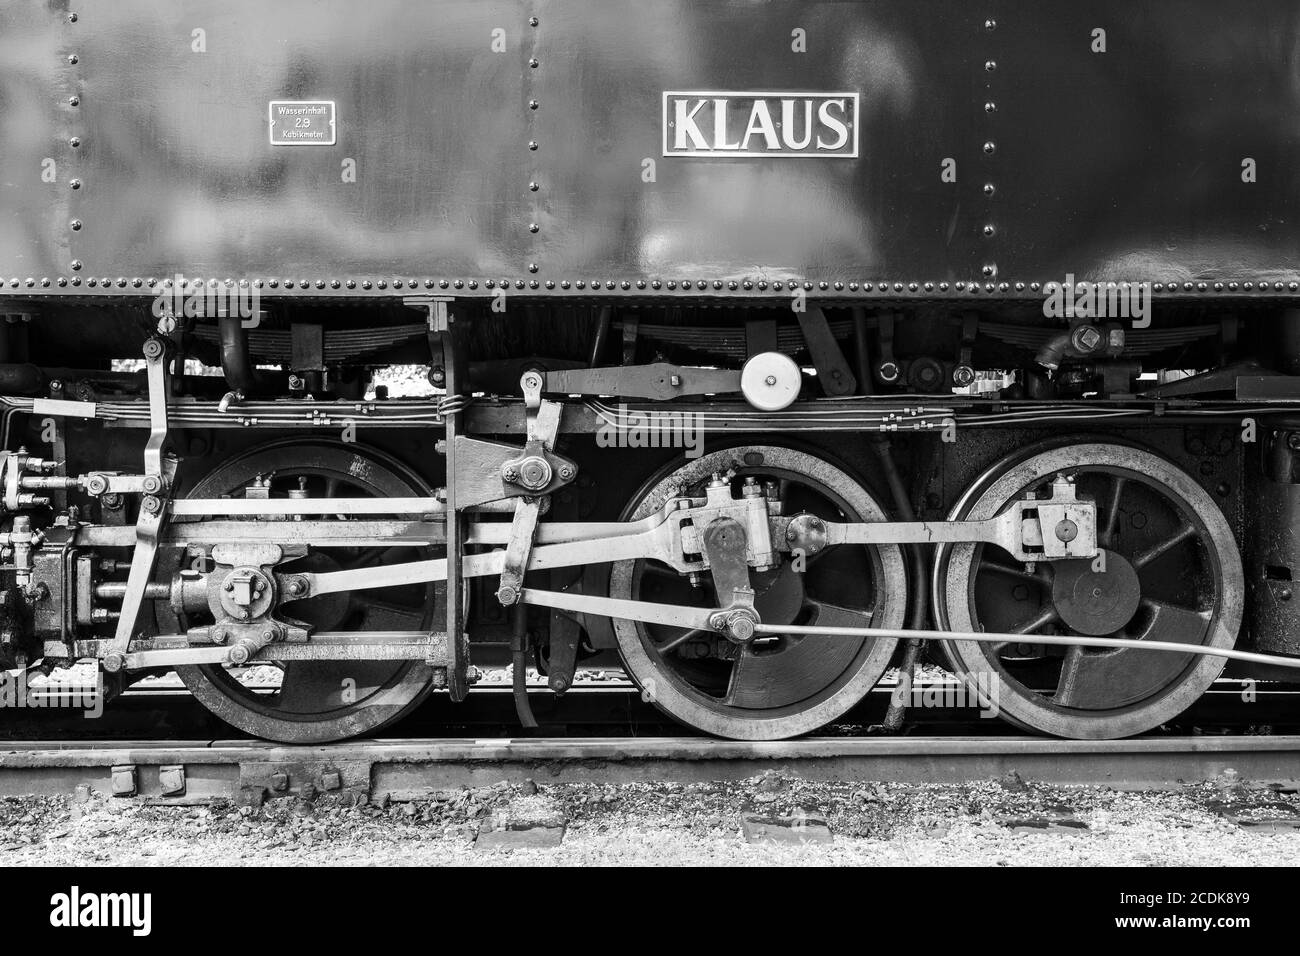 Monochrome image of train wheels on an old fashioned steam train from 1914 Klaus no. 6925 on the Steyr Valley Museum narrow gauge railway, Austria Stock Photo